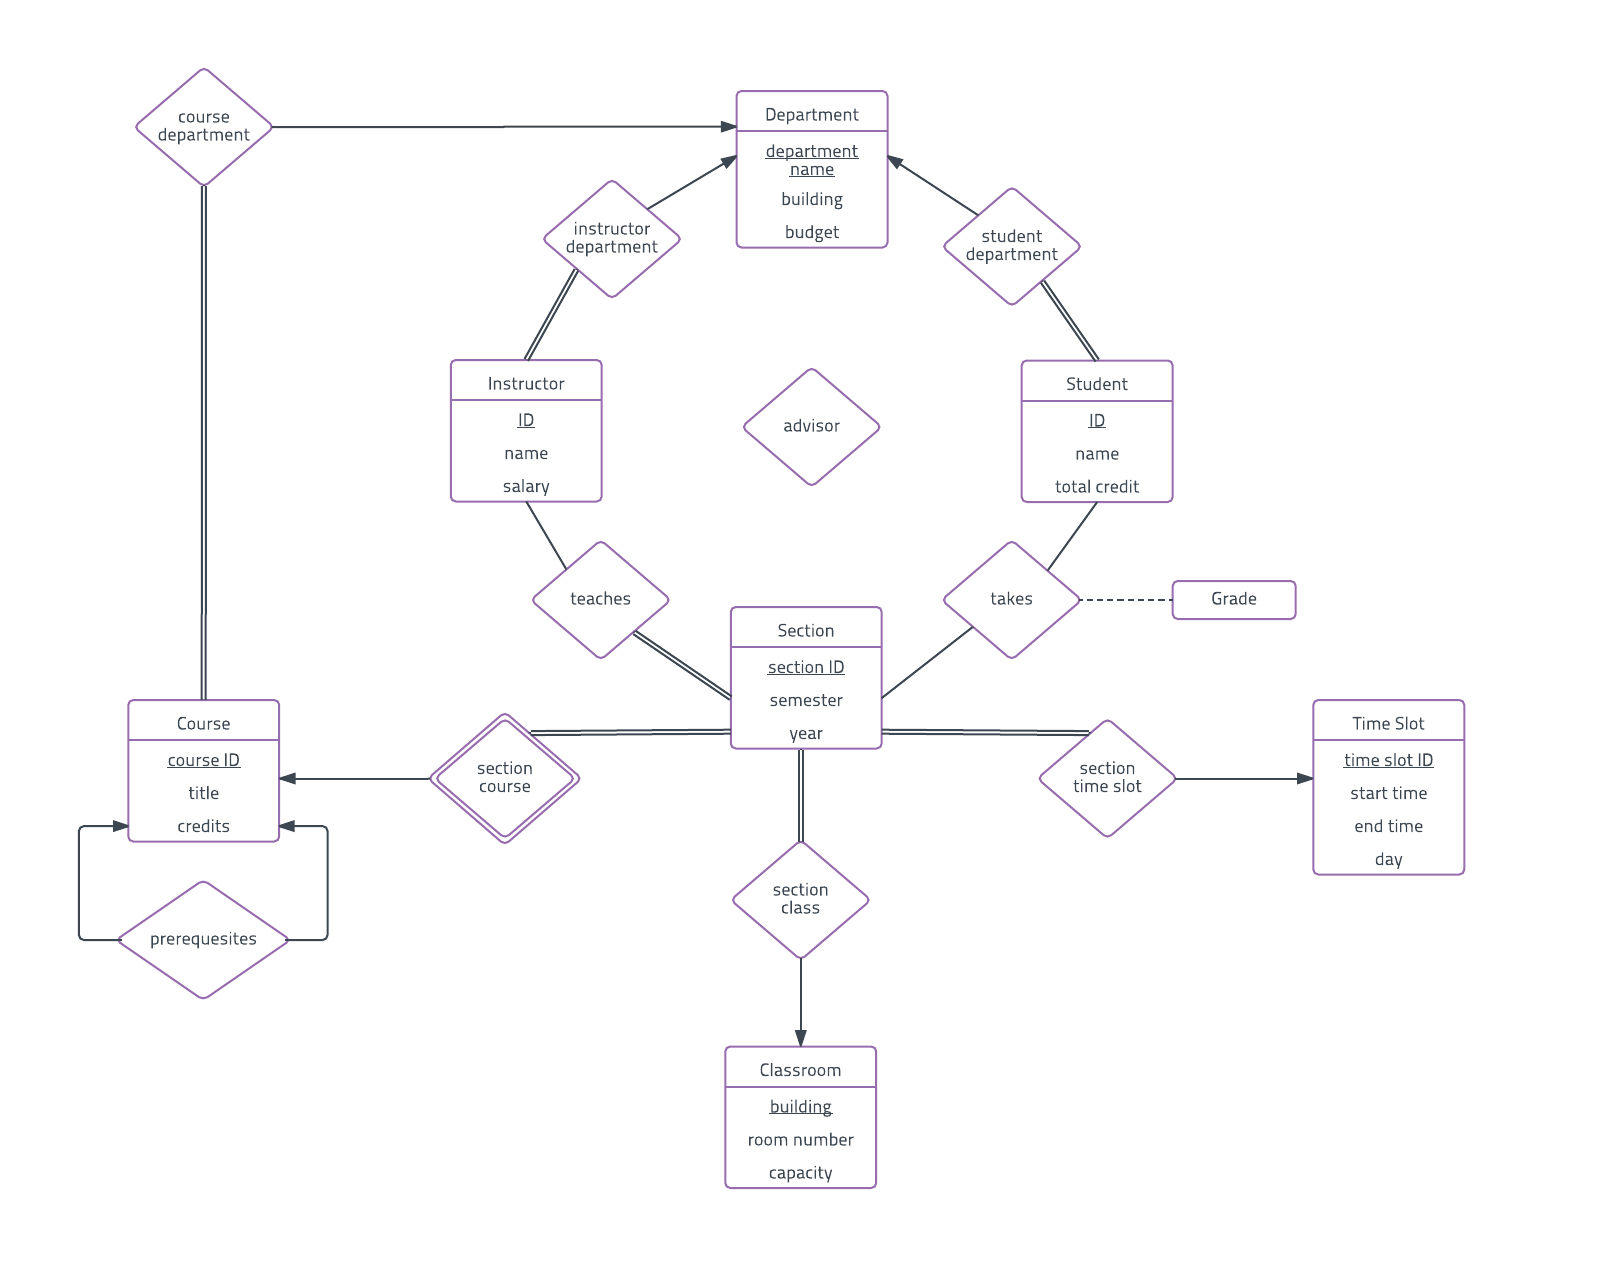 Er Diagram Examples And Templates | Lucidchart for Er Diagram Examples With Solutions In Dbms